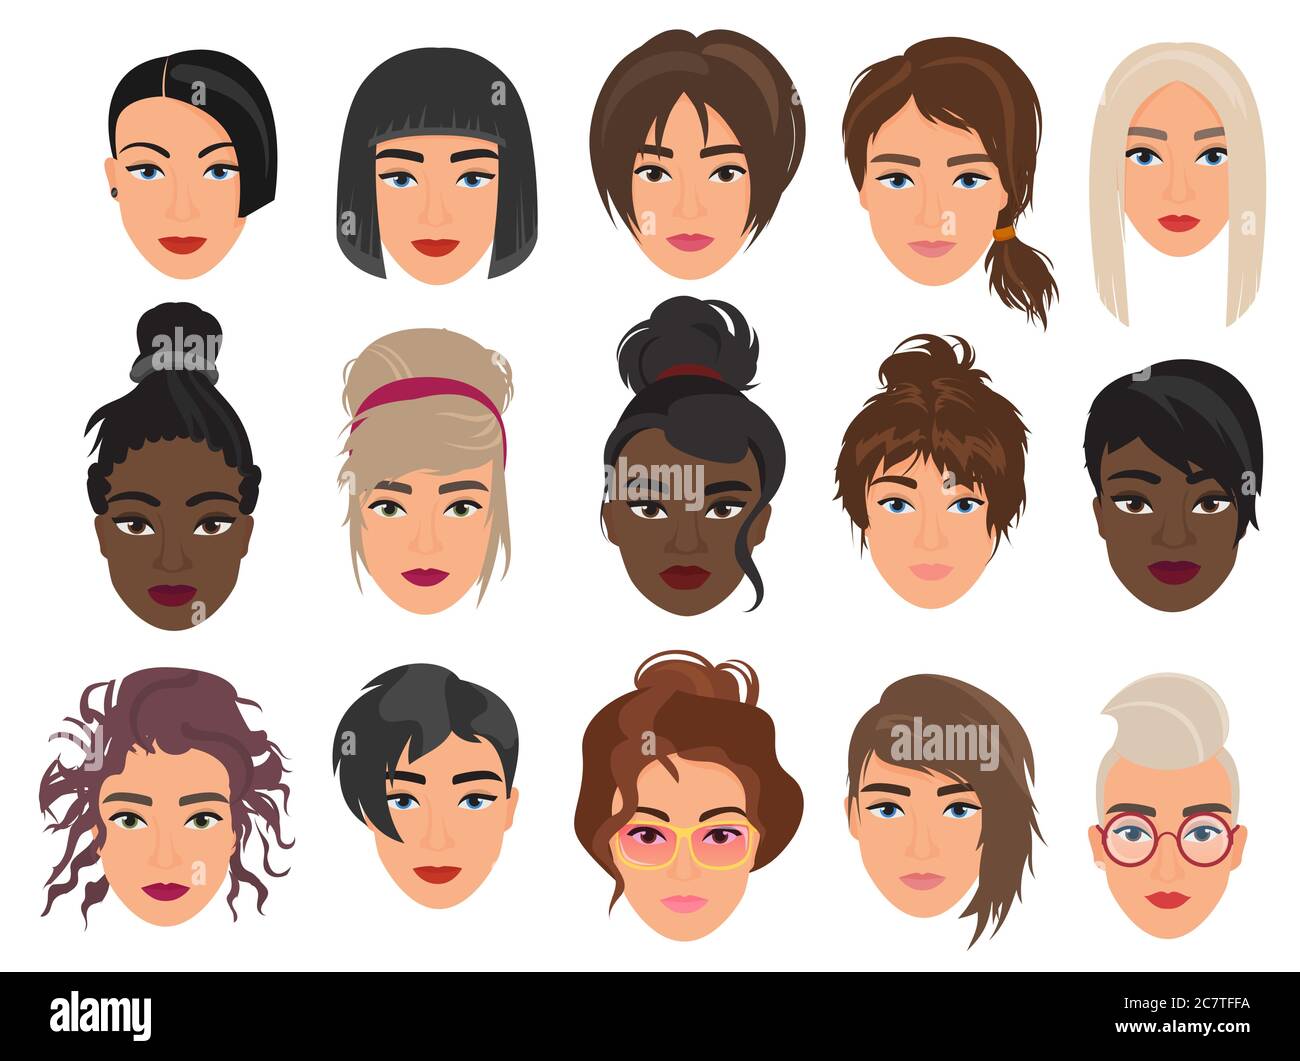 Women heads avatars characters flat cartoon vector illustration set isolated on white background. Beautiful light and dark faces, fashionable various modern and alternative haircuts Stock Vector